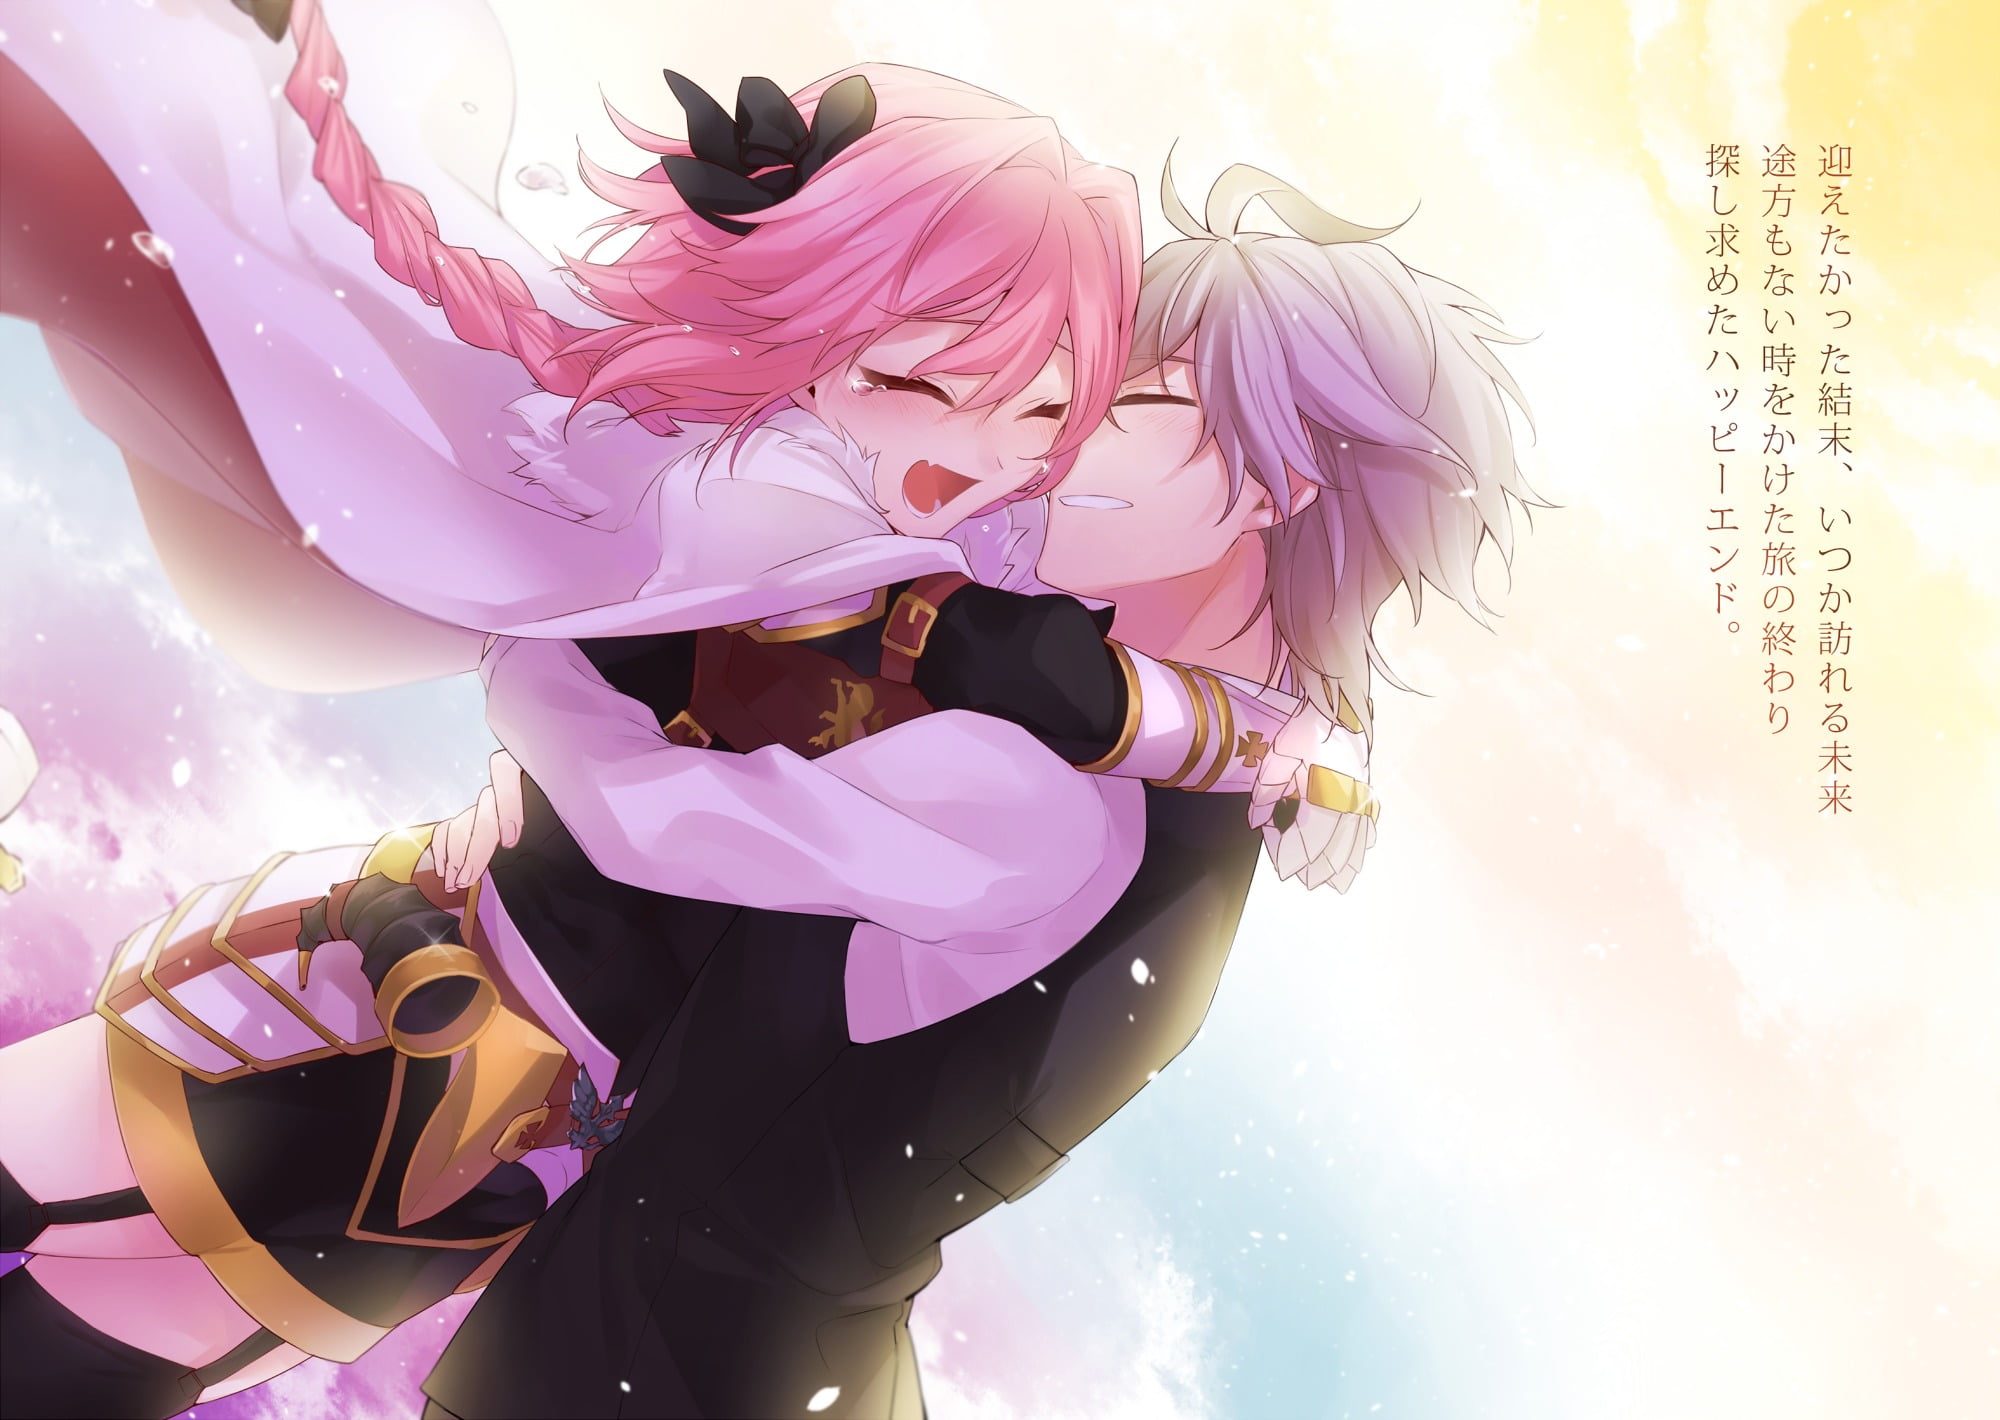 pink haired female anime hugging purple-haired male anime character illustration